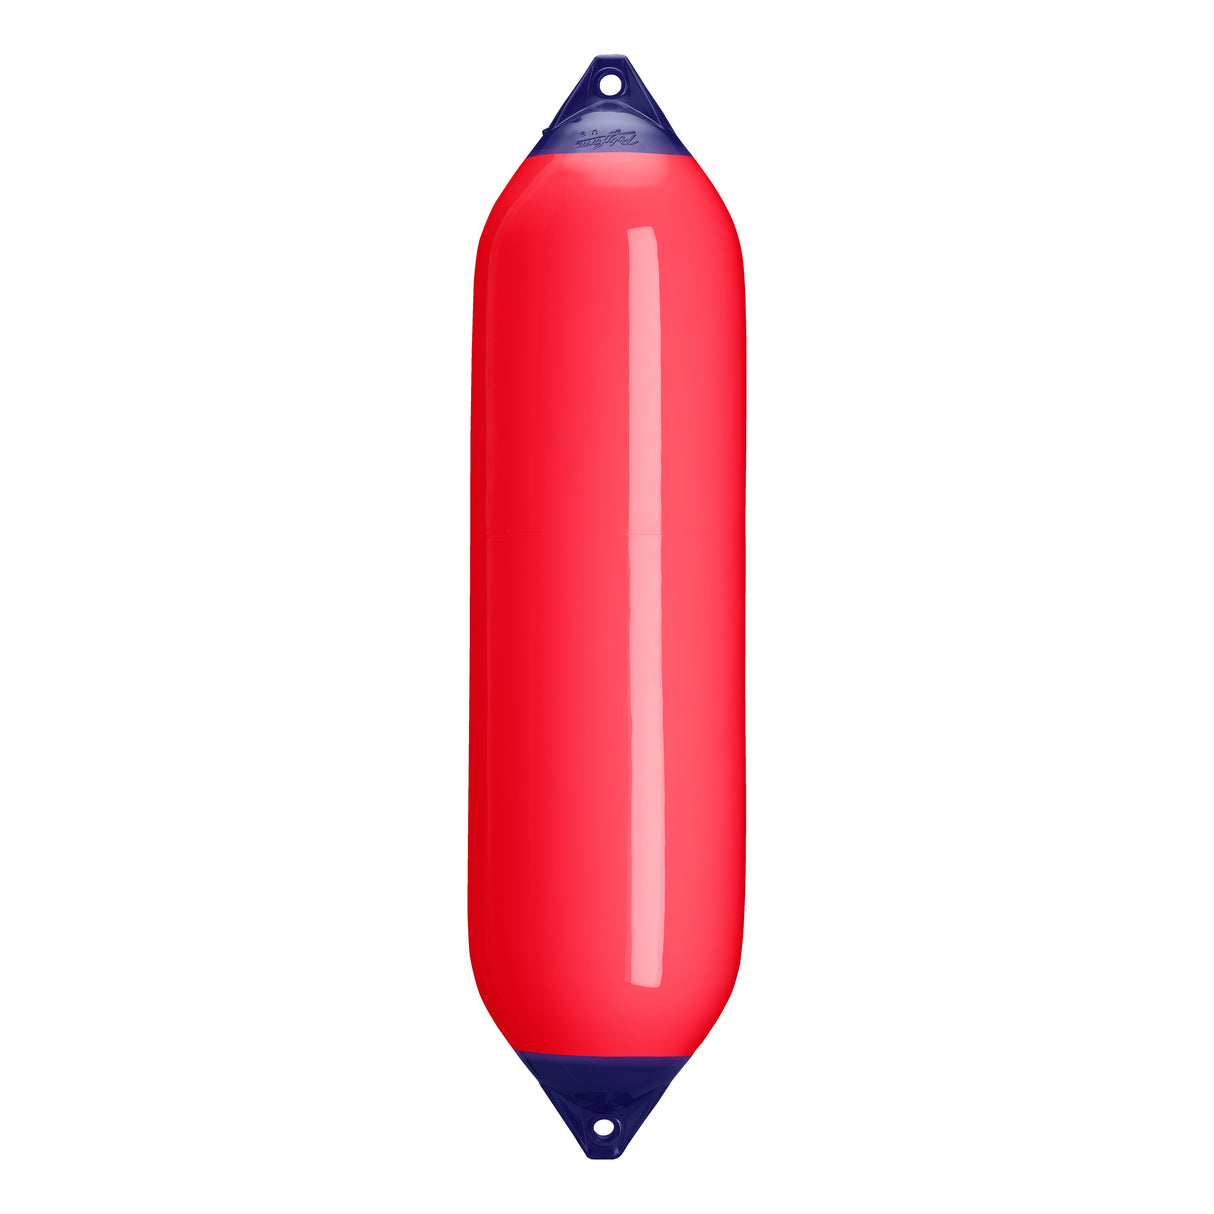 Red boat fender with Navy-Top, Polyform F-8 